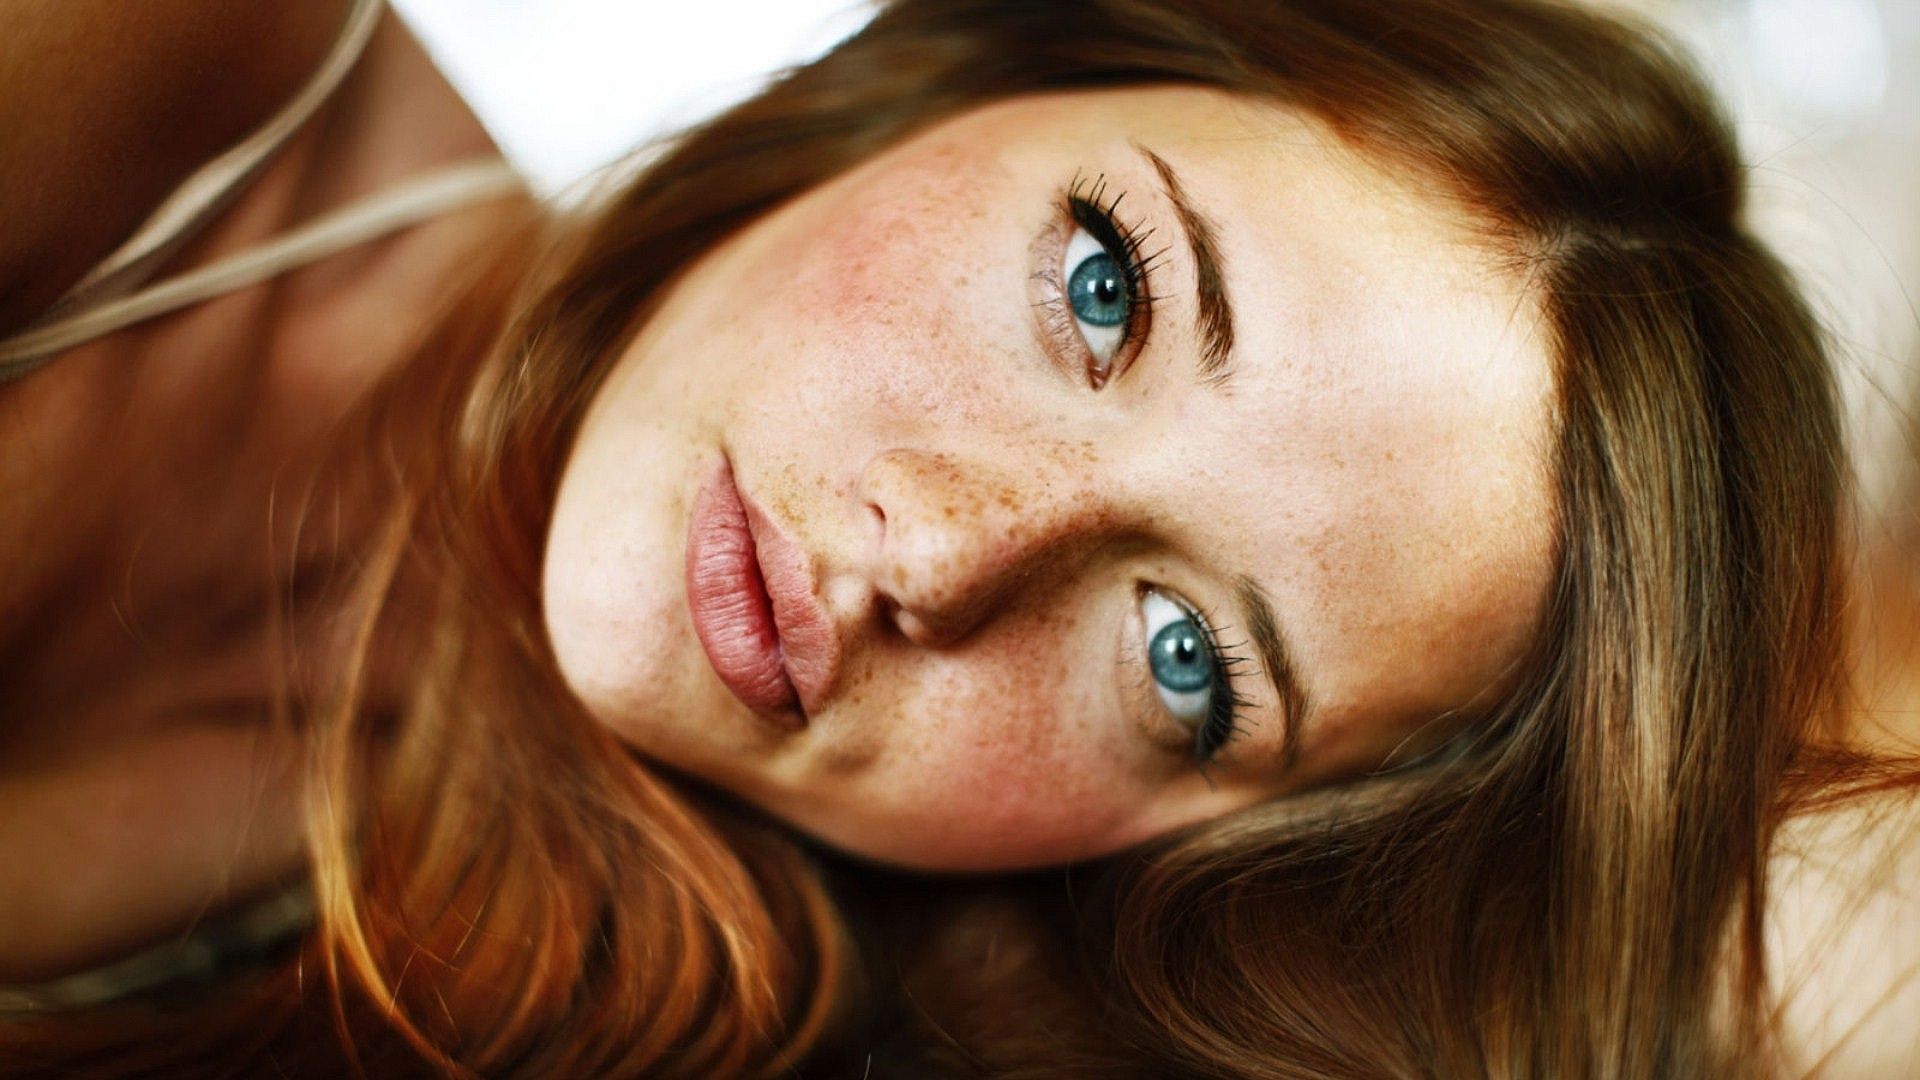 Girls With Freckles